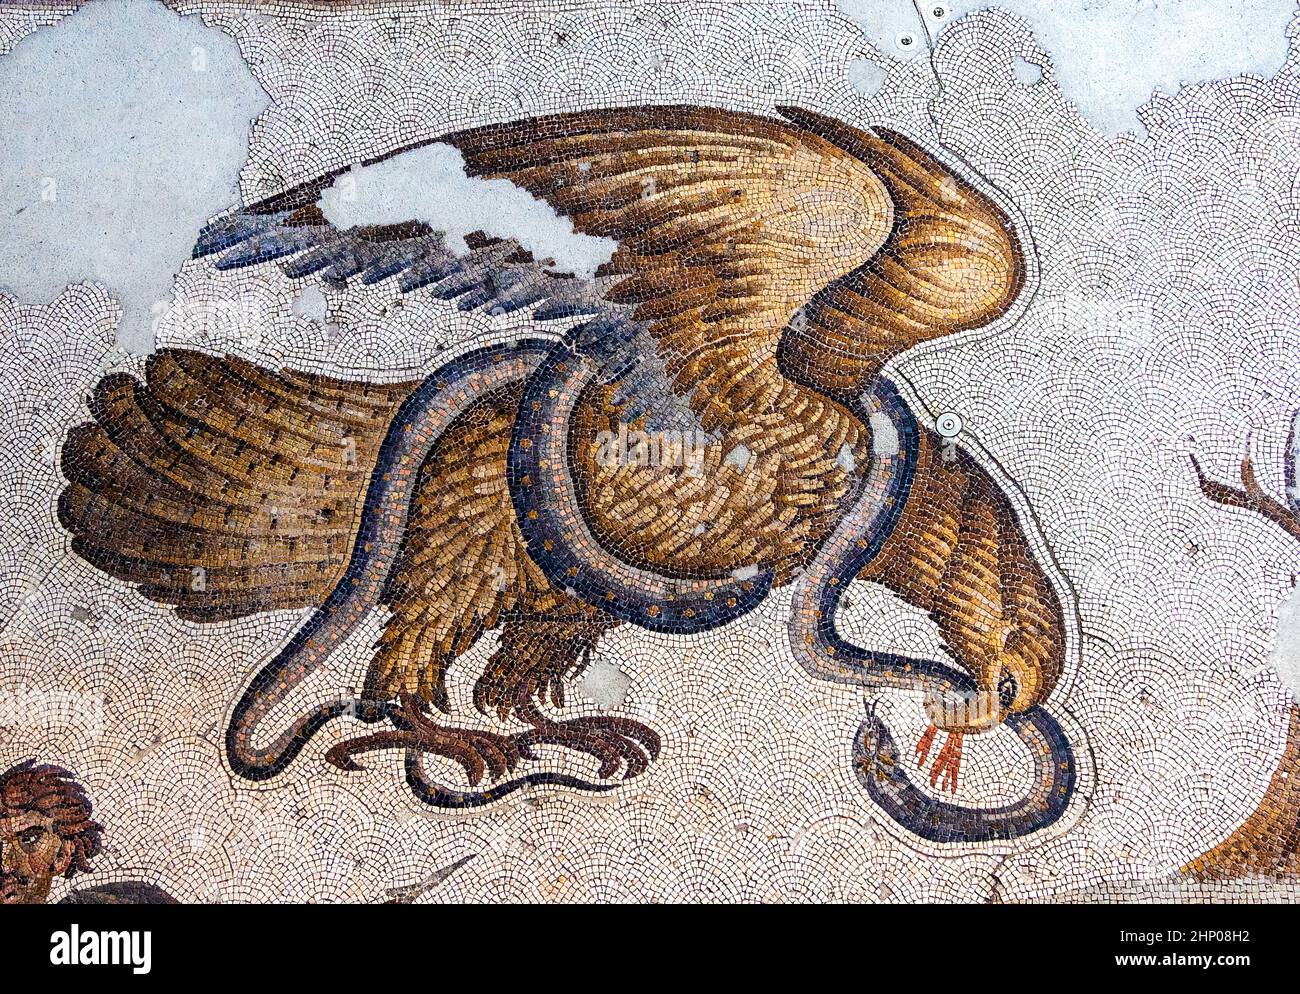 Ancient Eagle and Serpent Mosaic from the Byzantine period (East Roman period) at the Great Palace of Constantinople. 4th-6th century. Stock Photo